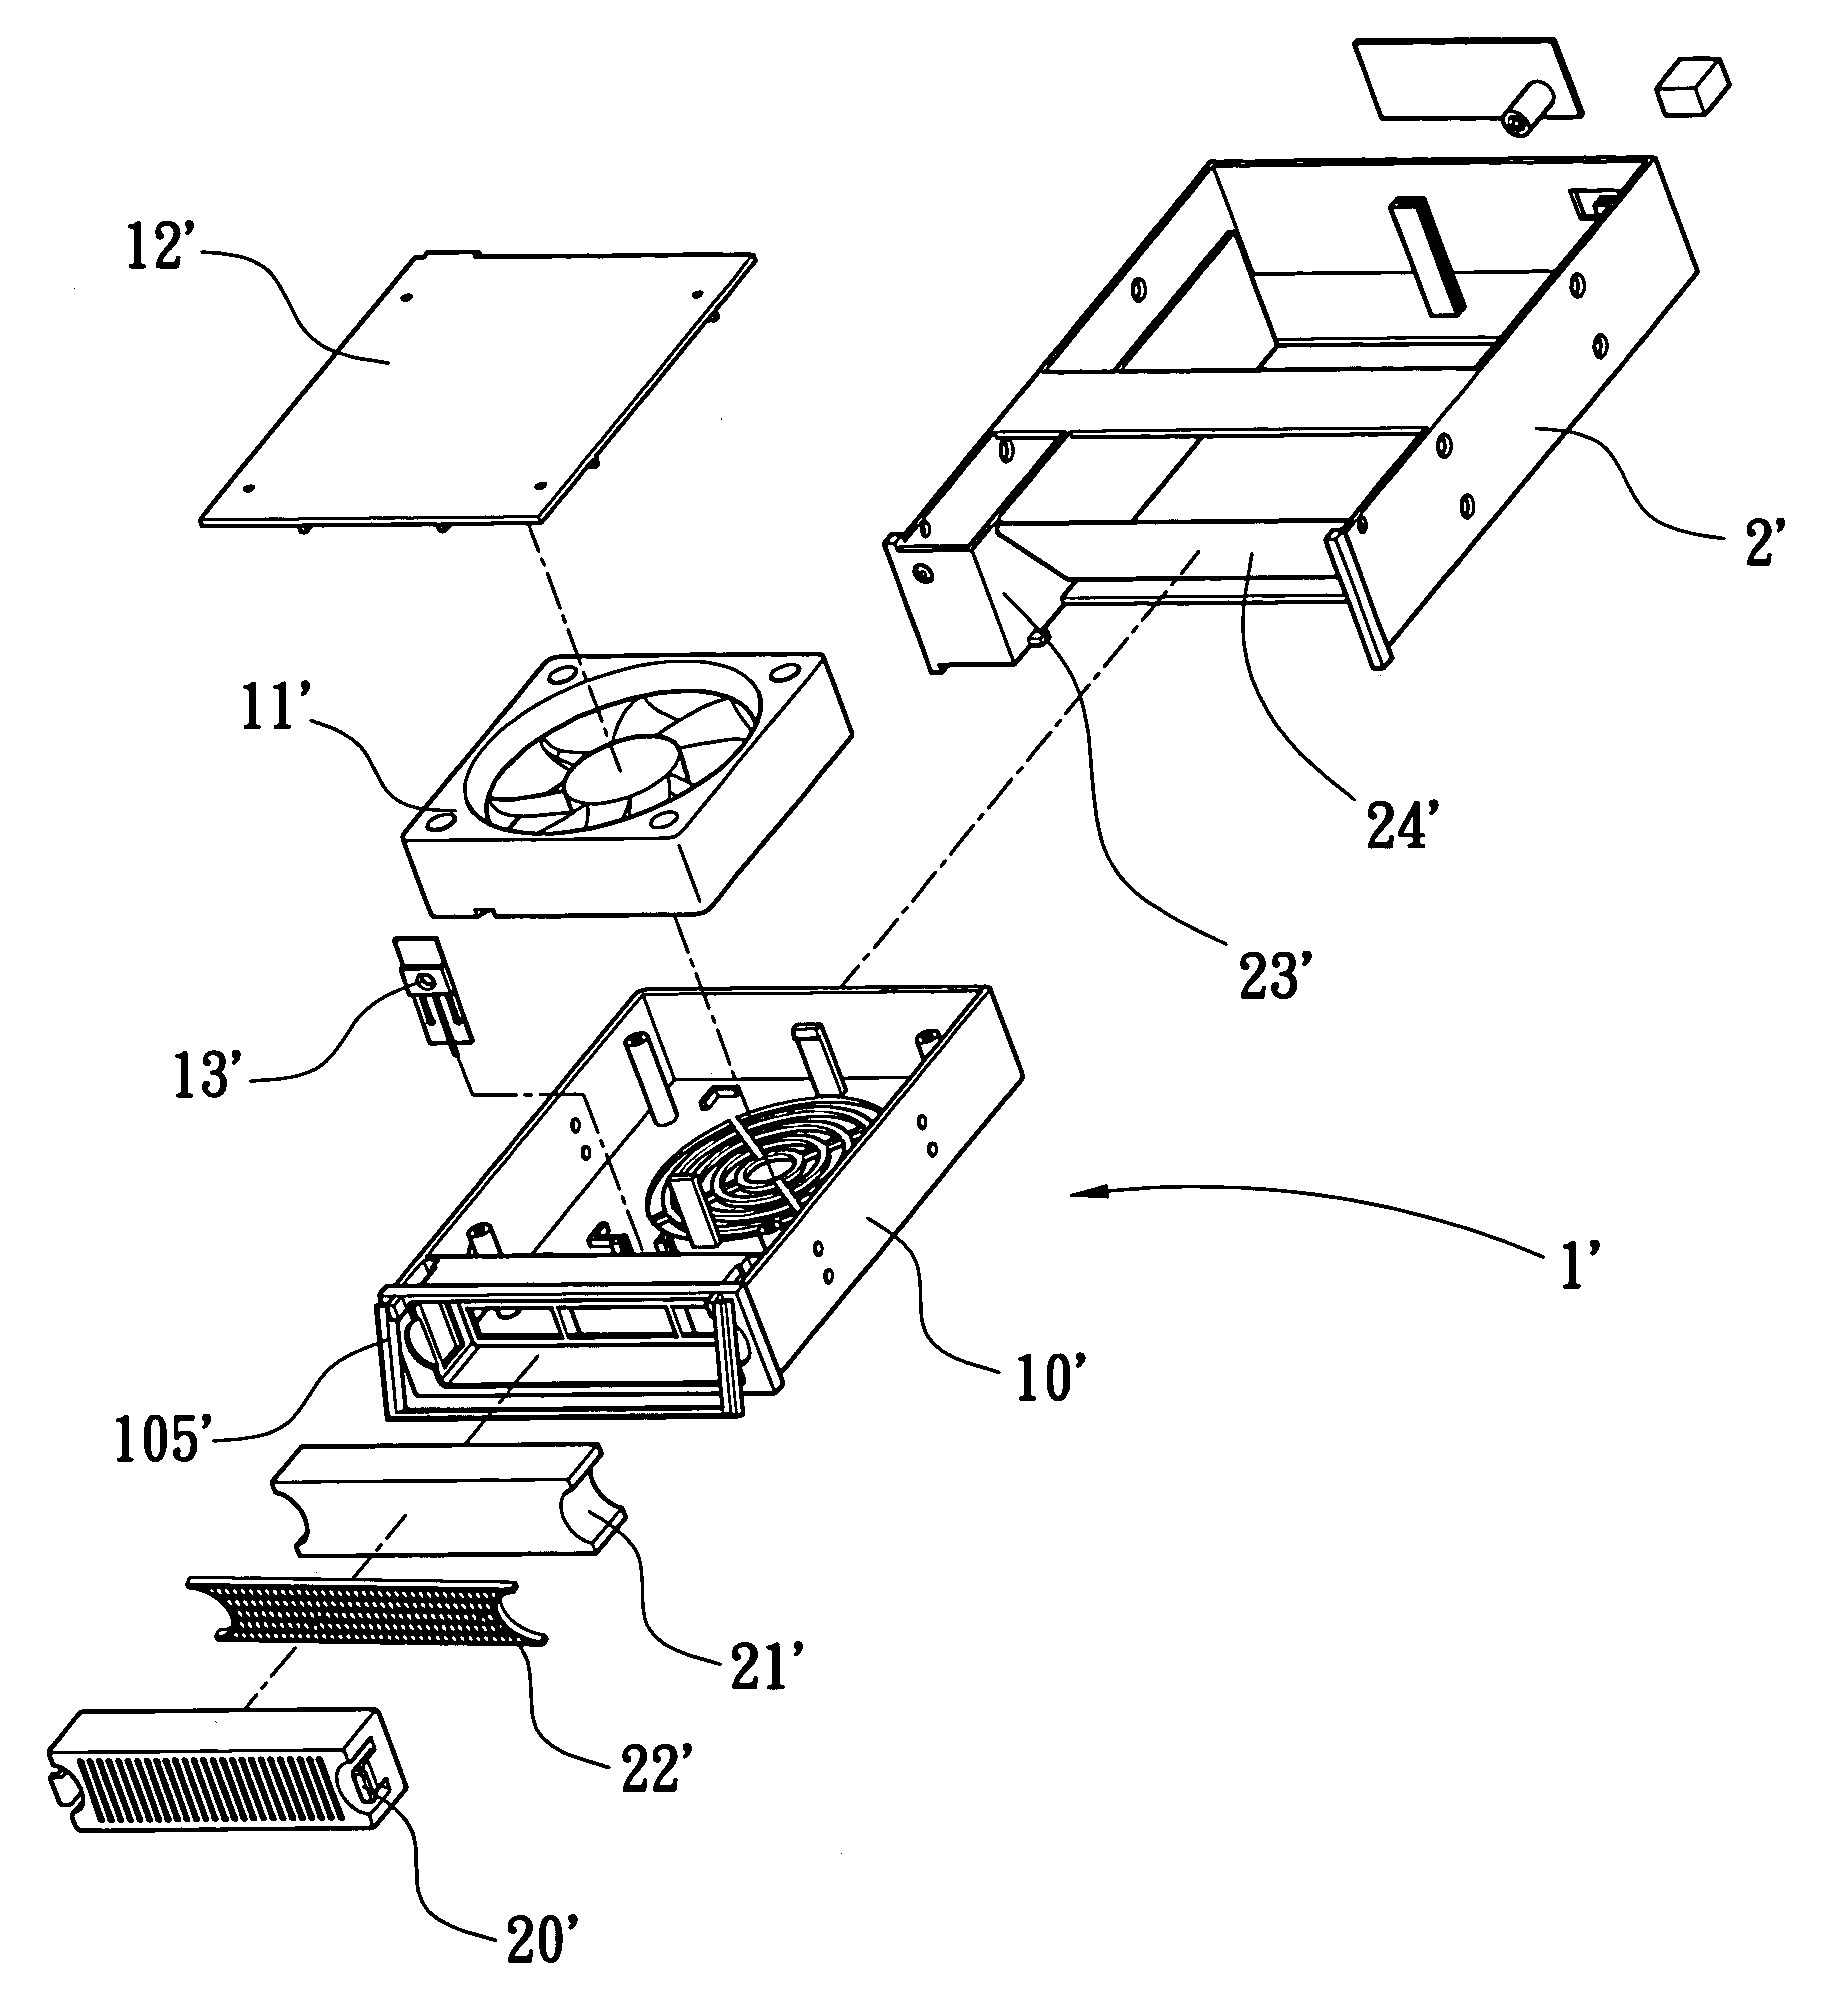 Computer fan assembly mechanism having filtering and sterilizing functions